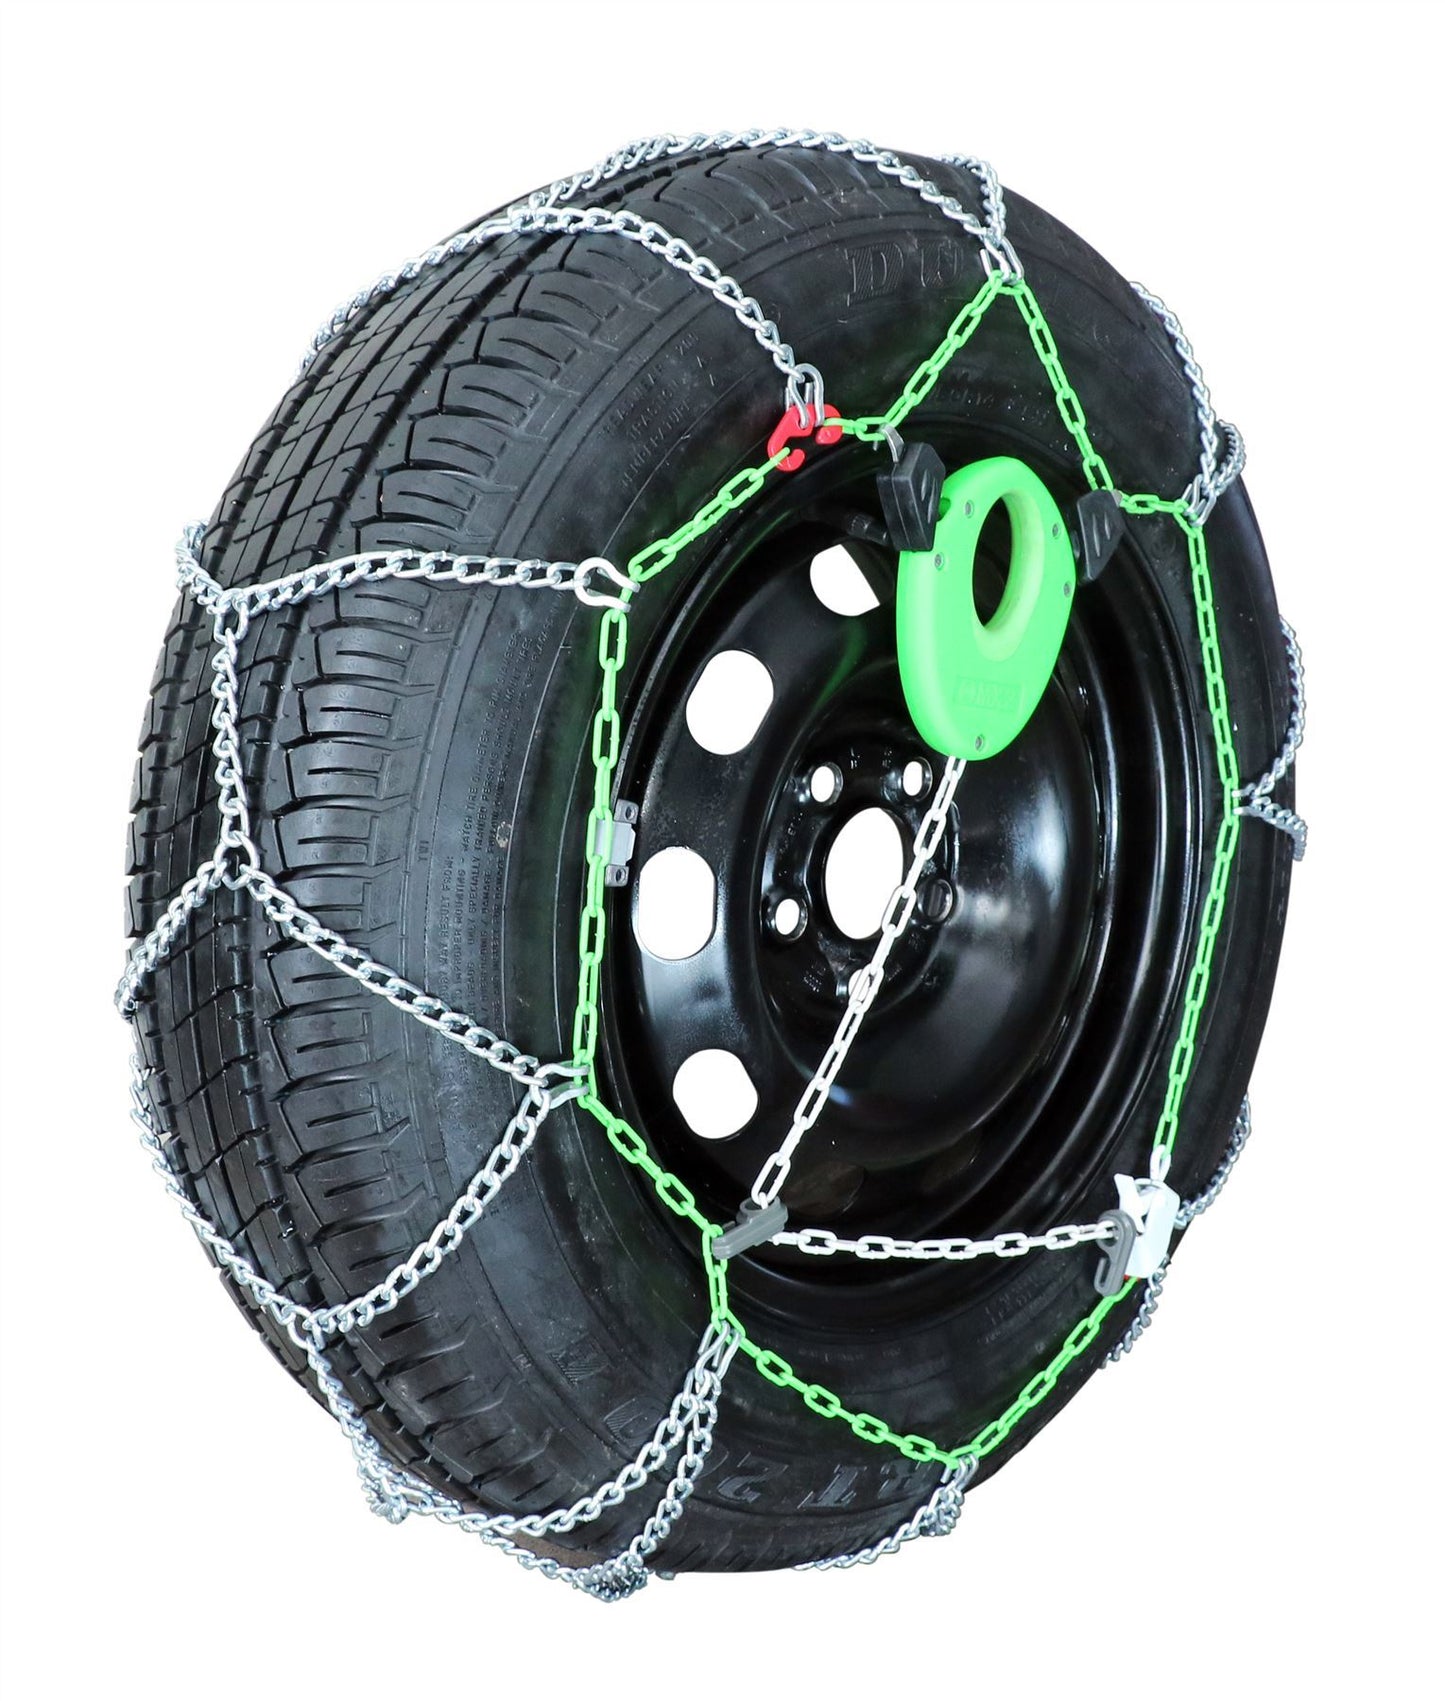 Green Valley TXR7 Winter 7mm Snow Chains - Car Tyre for 18" Wheels 235/50-18